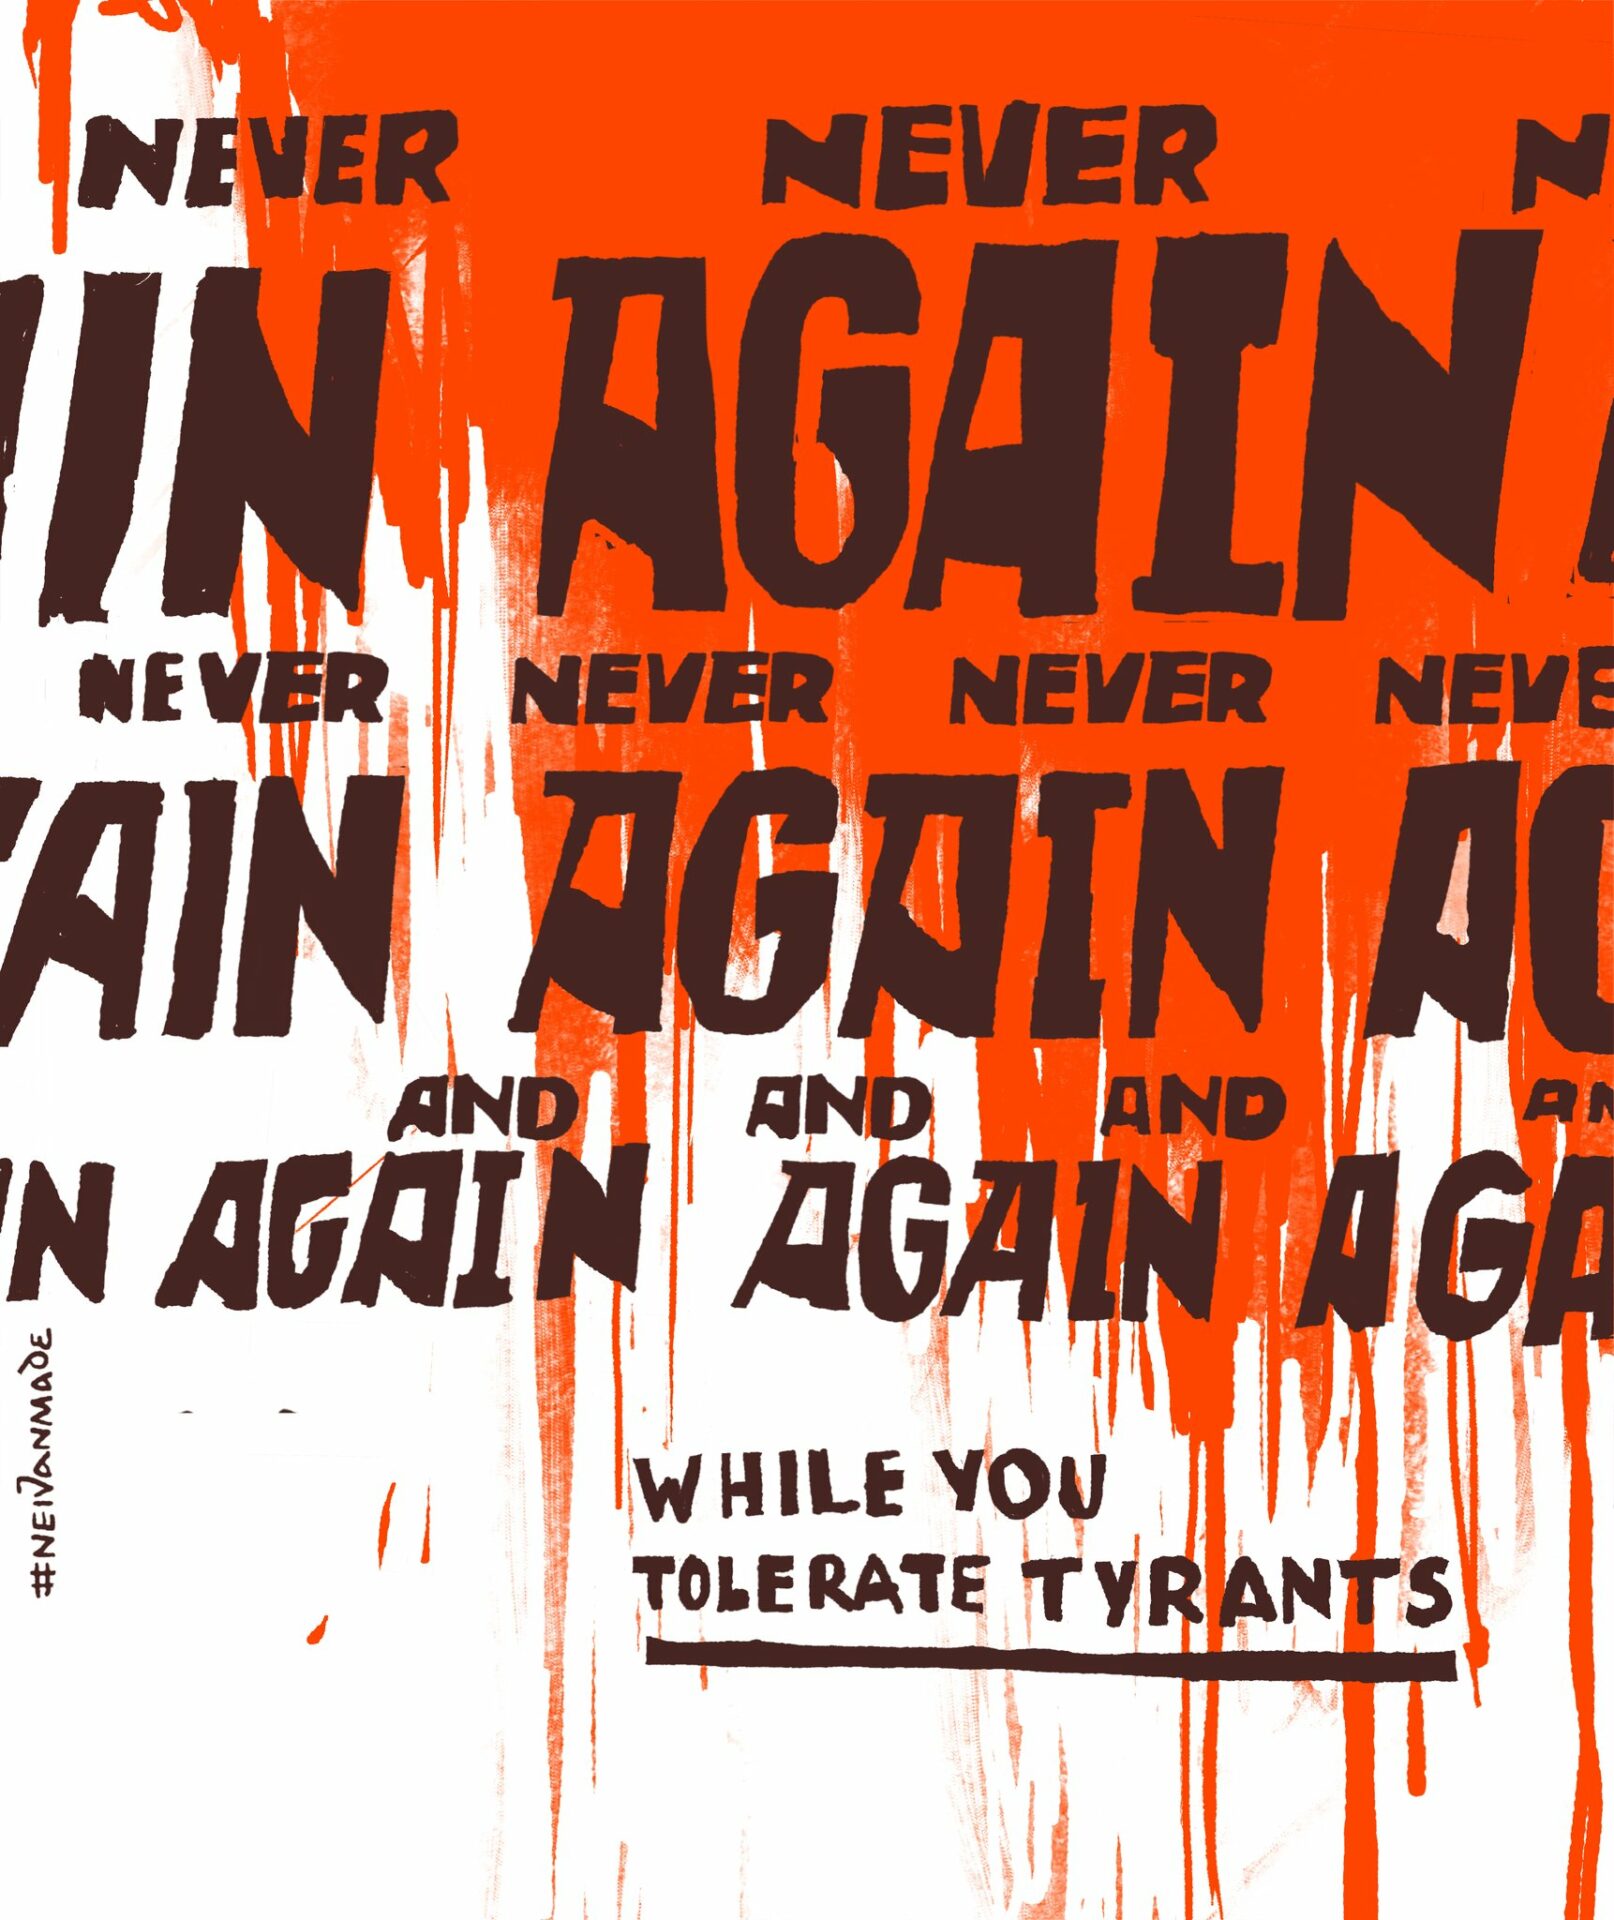 A painting by Ukrainian artist NEIVANMADE. The words "NEVER AGAIN" are repeated over and over, from left to right and top to bottom, in a faded, washed out black against a white background. Red, the color of blood, runs and drips down across 2/3rds of the painting. "WHILE YOU TOLERATE TYRANTS" is written/painted in the bottom white corner below the three rows of "NEVER AGAIN".